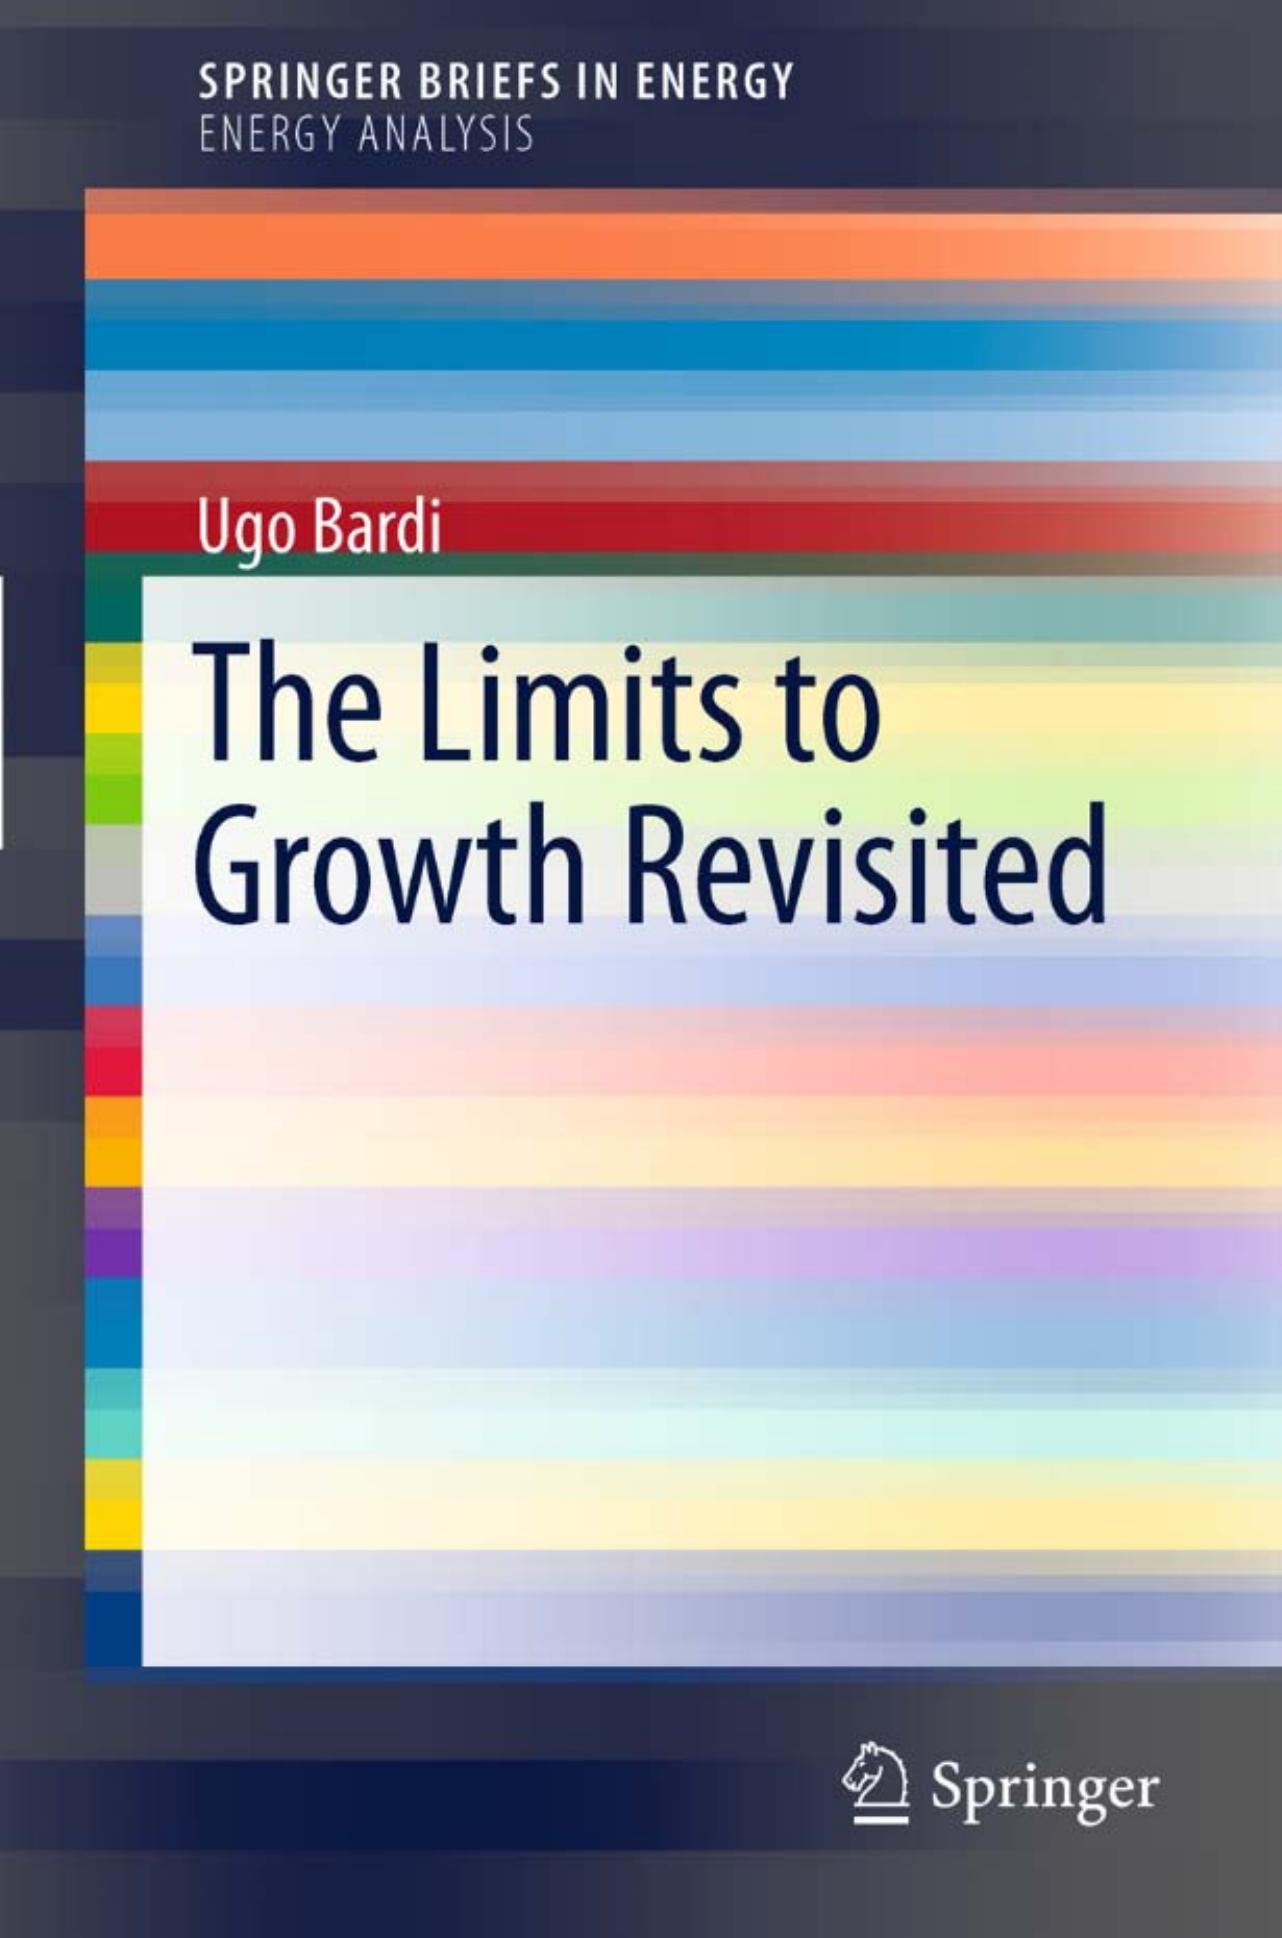 The Limits to Growth Revisited by Ugo Bardi